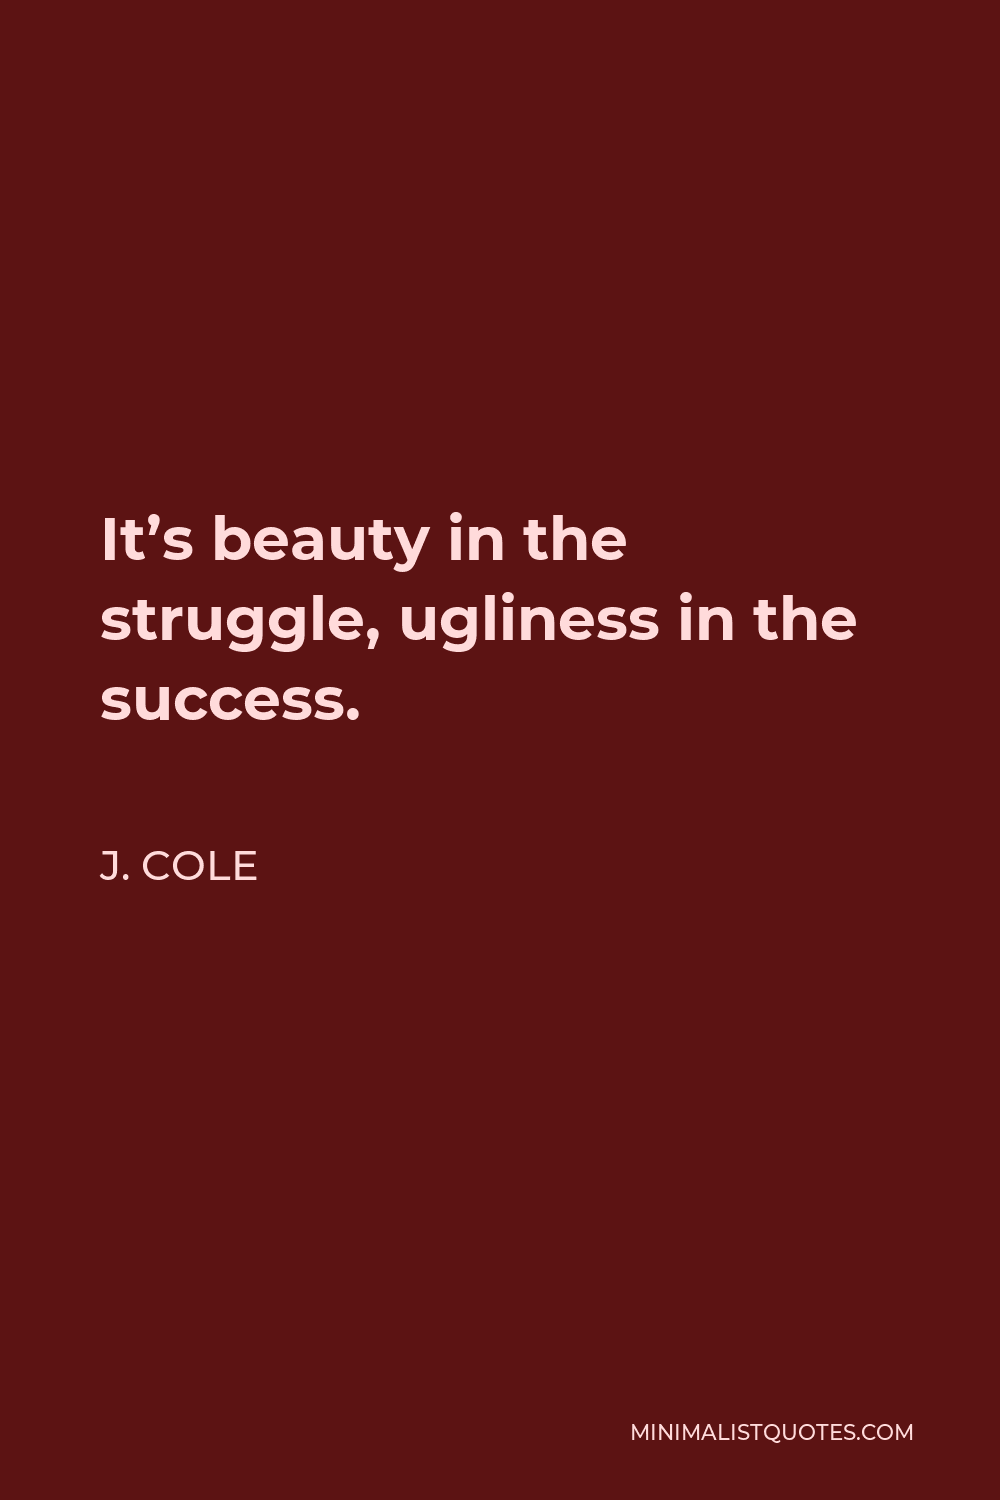 J. Cole Quote - It’s beauty in the struggle, ugliness in the success.